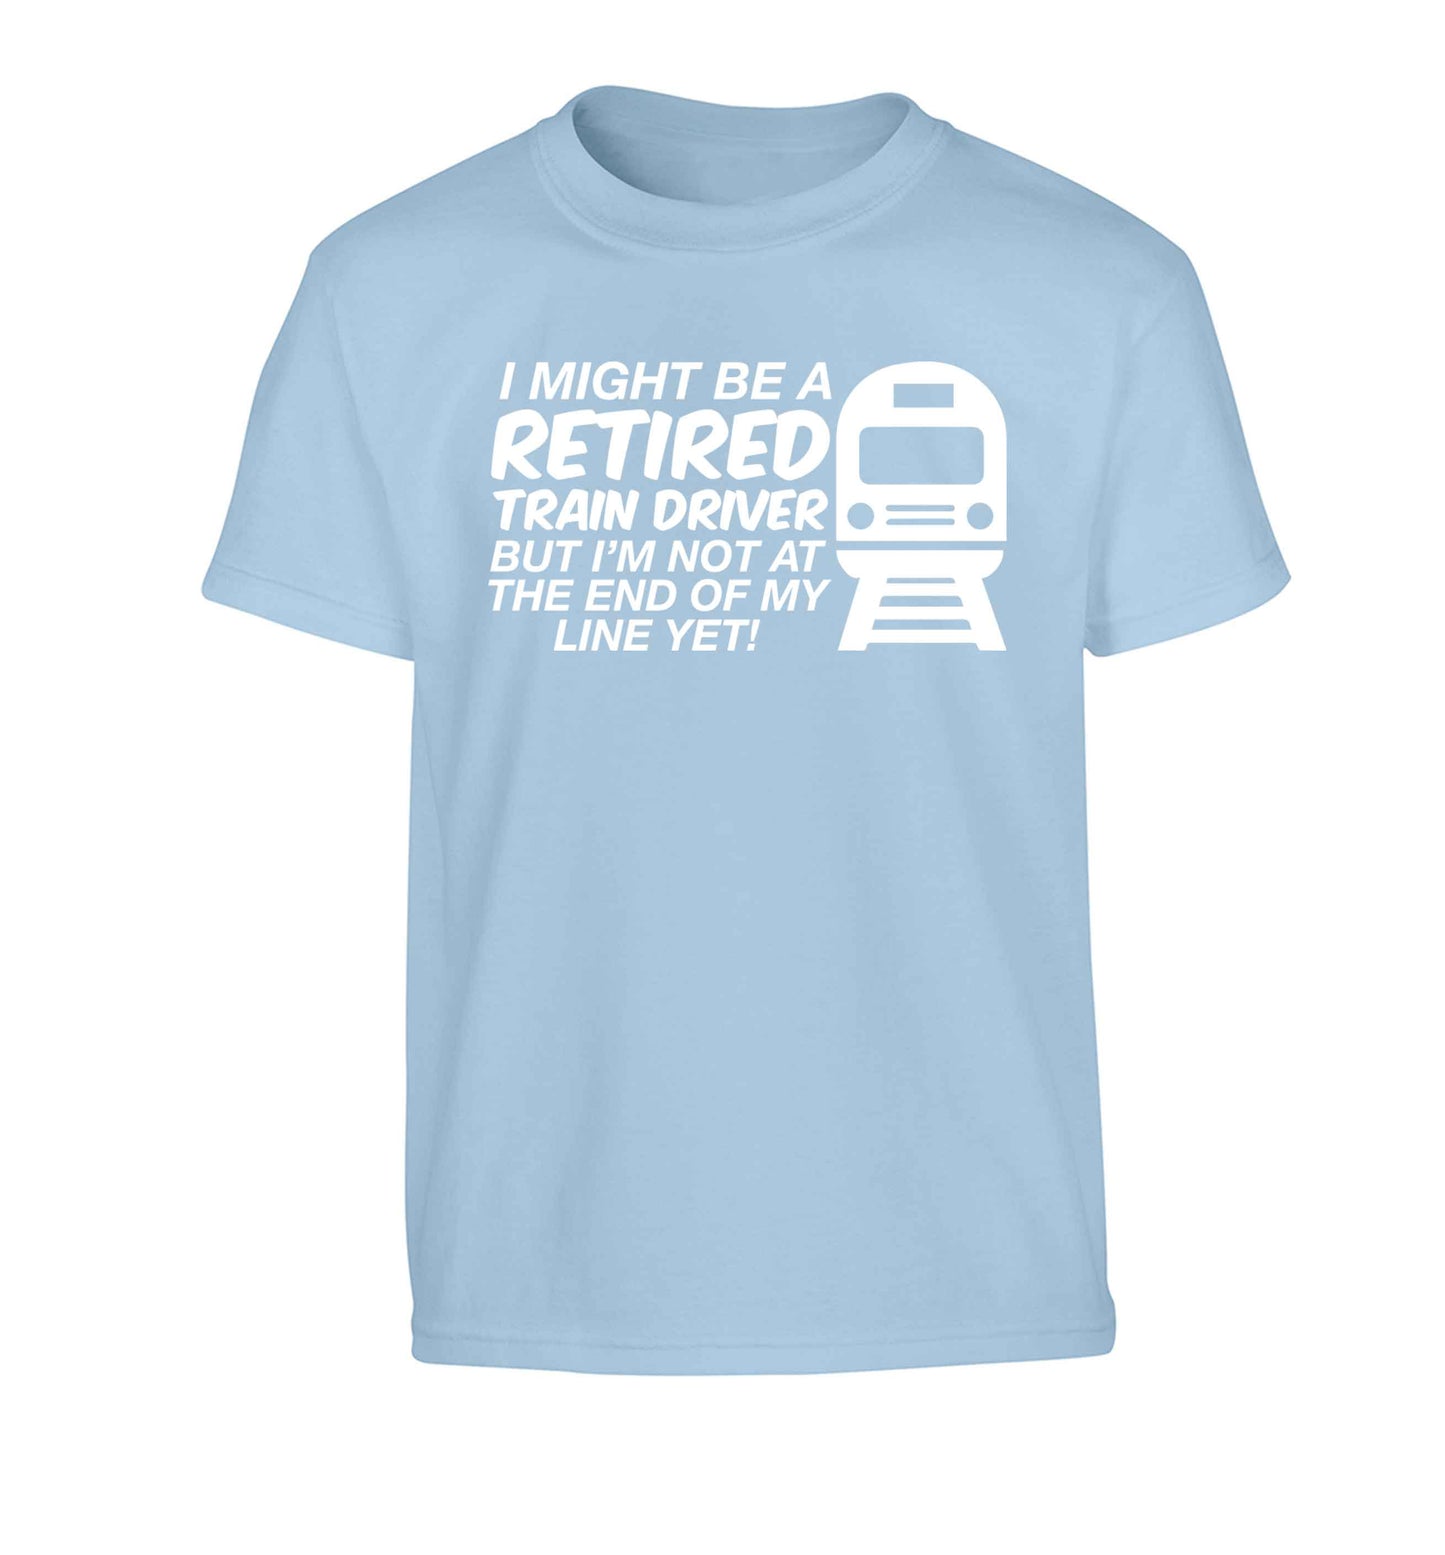 Retired train driver but I'm not at the end of my line yet Children's light blue Tshirt 12-13 Years